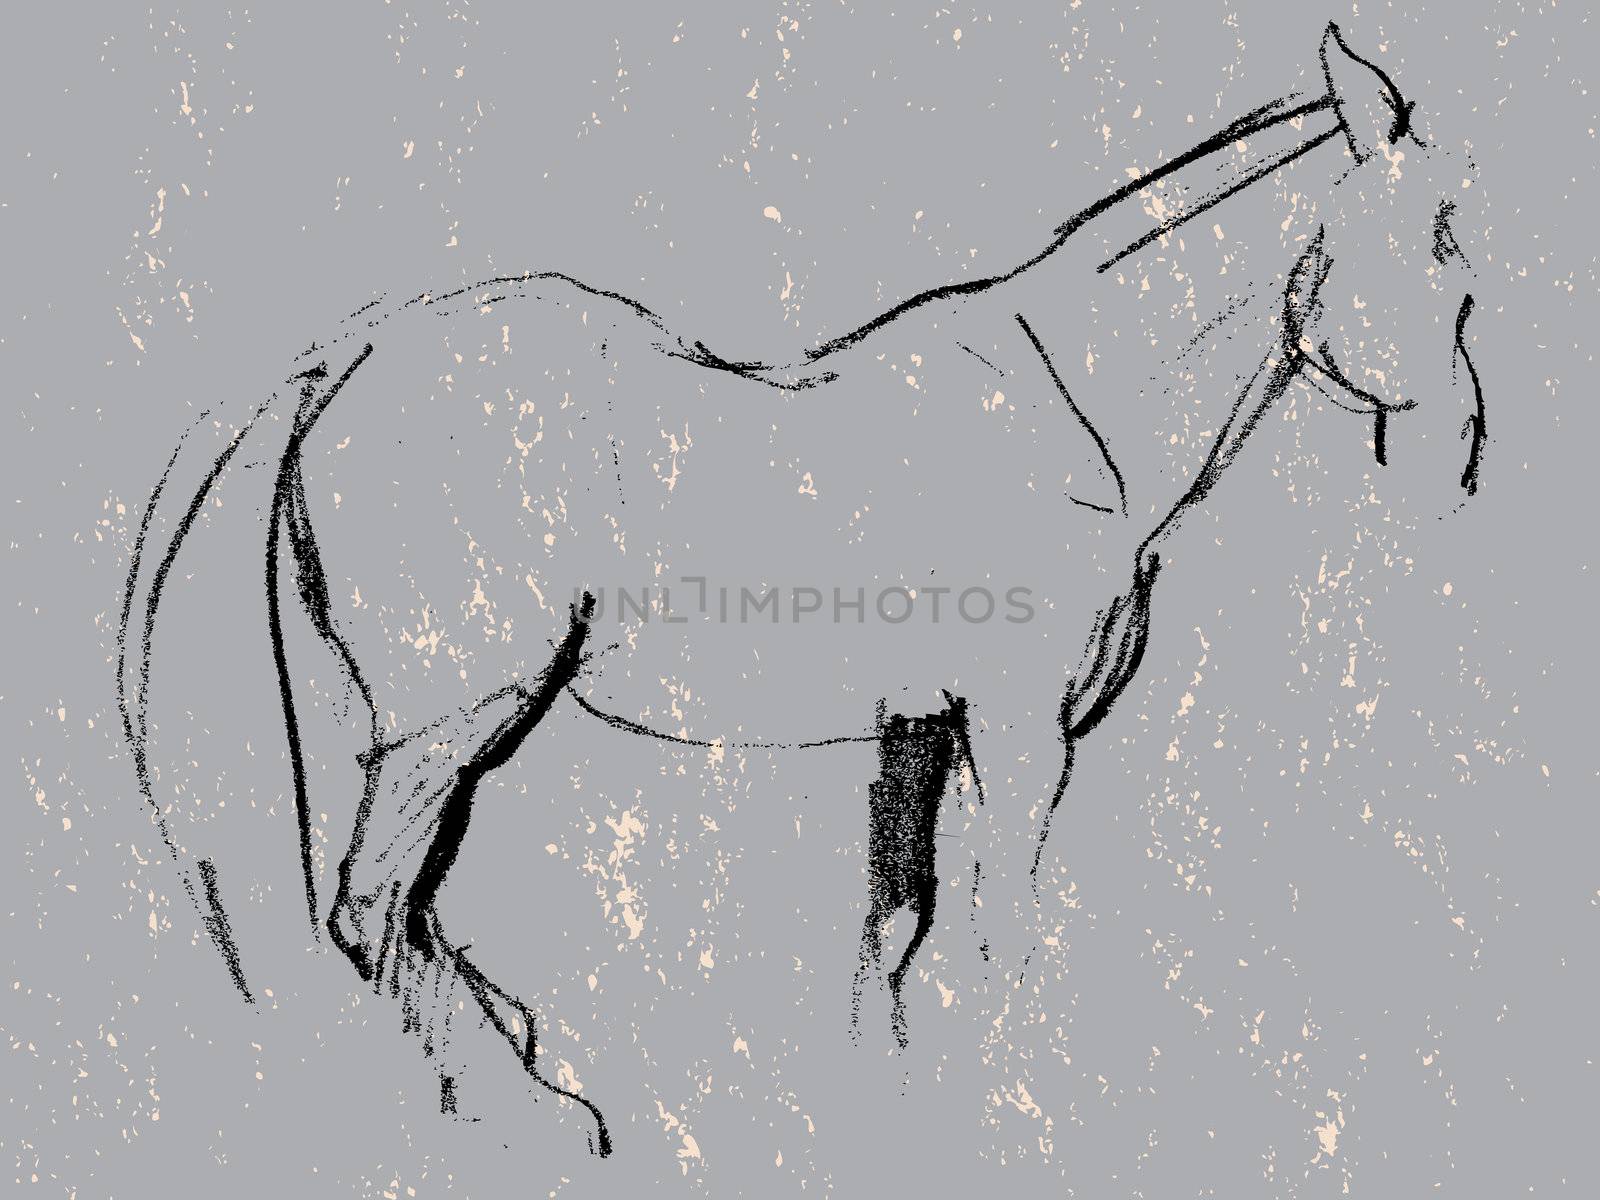 Hand drawn grunge illustration of a horse, charcoal sketch on stone